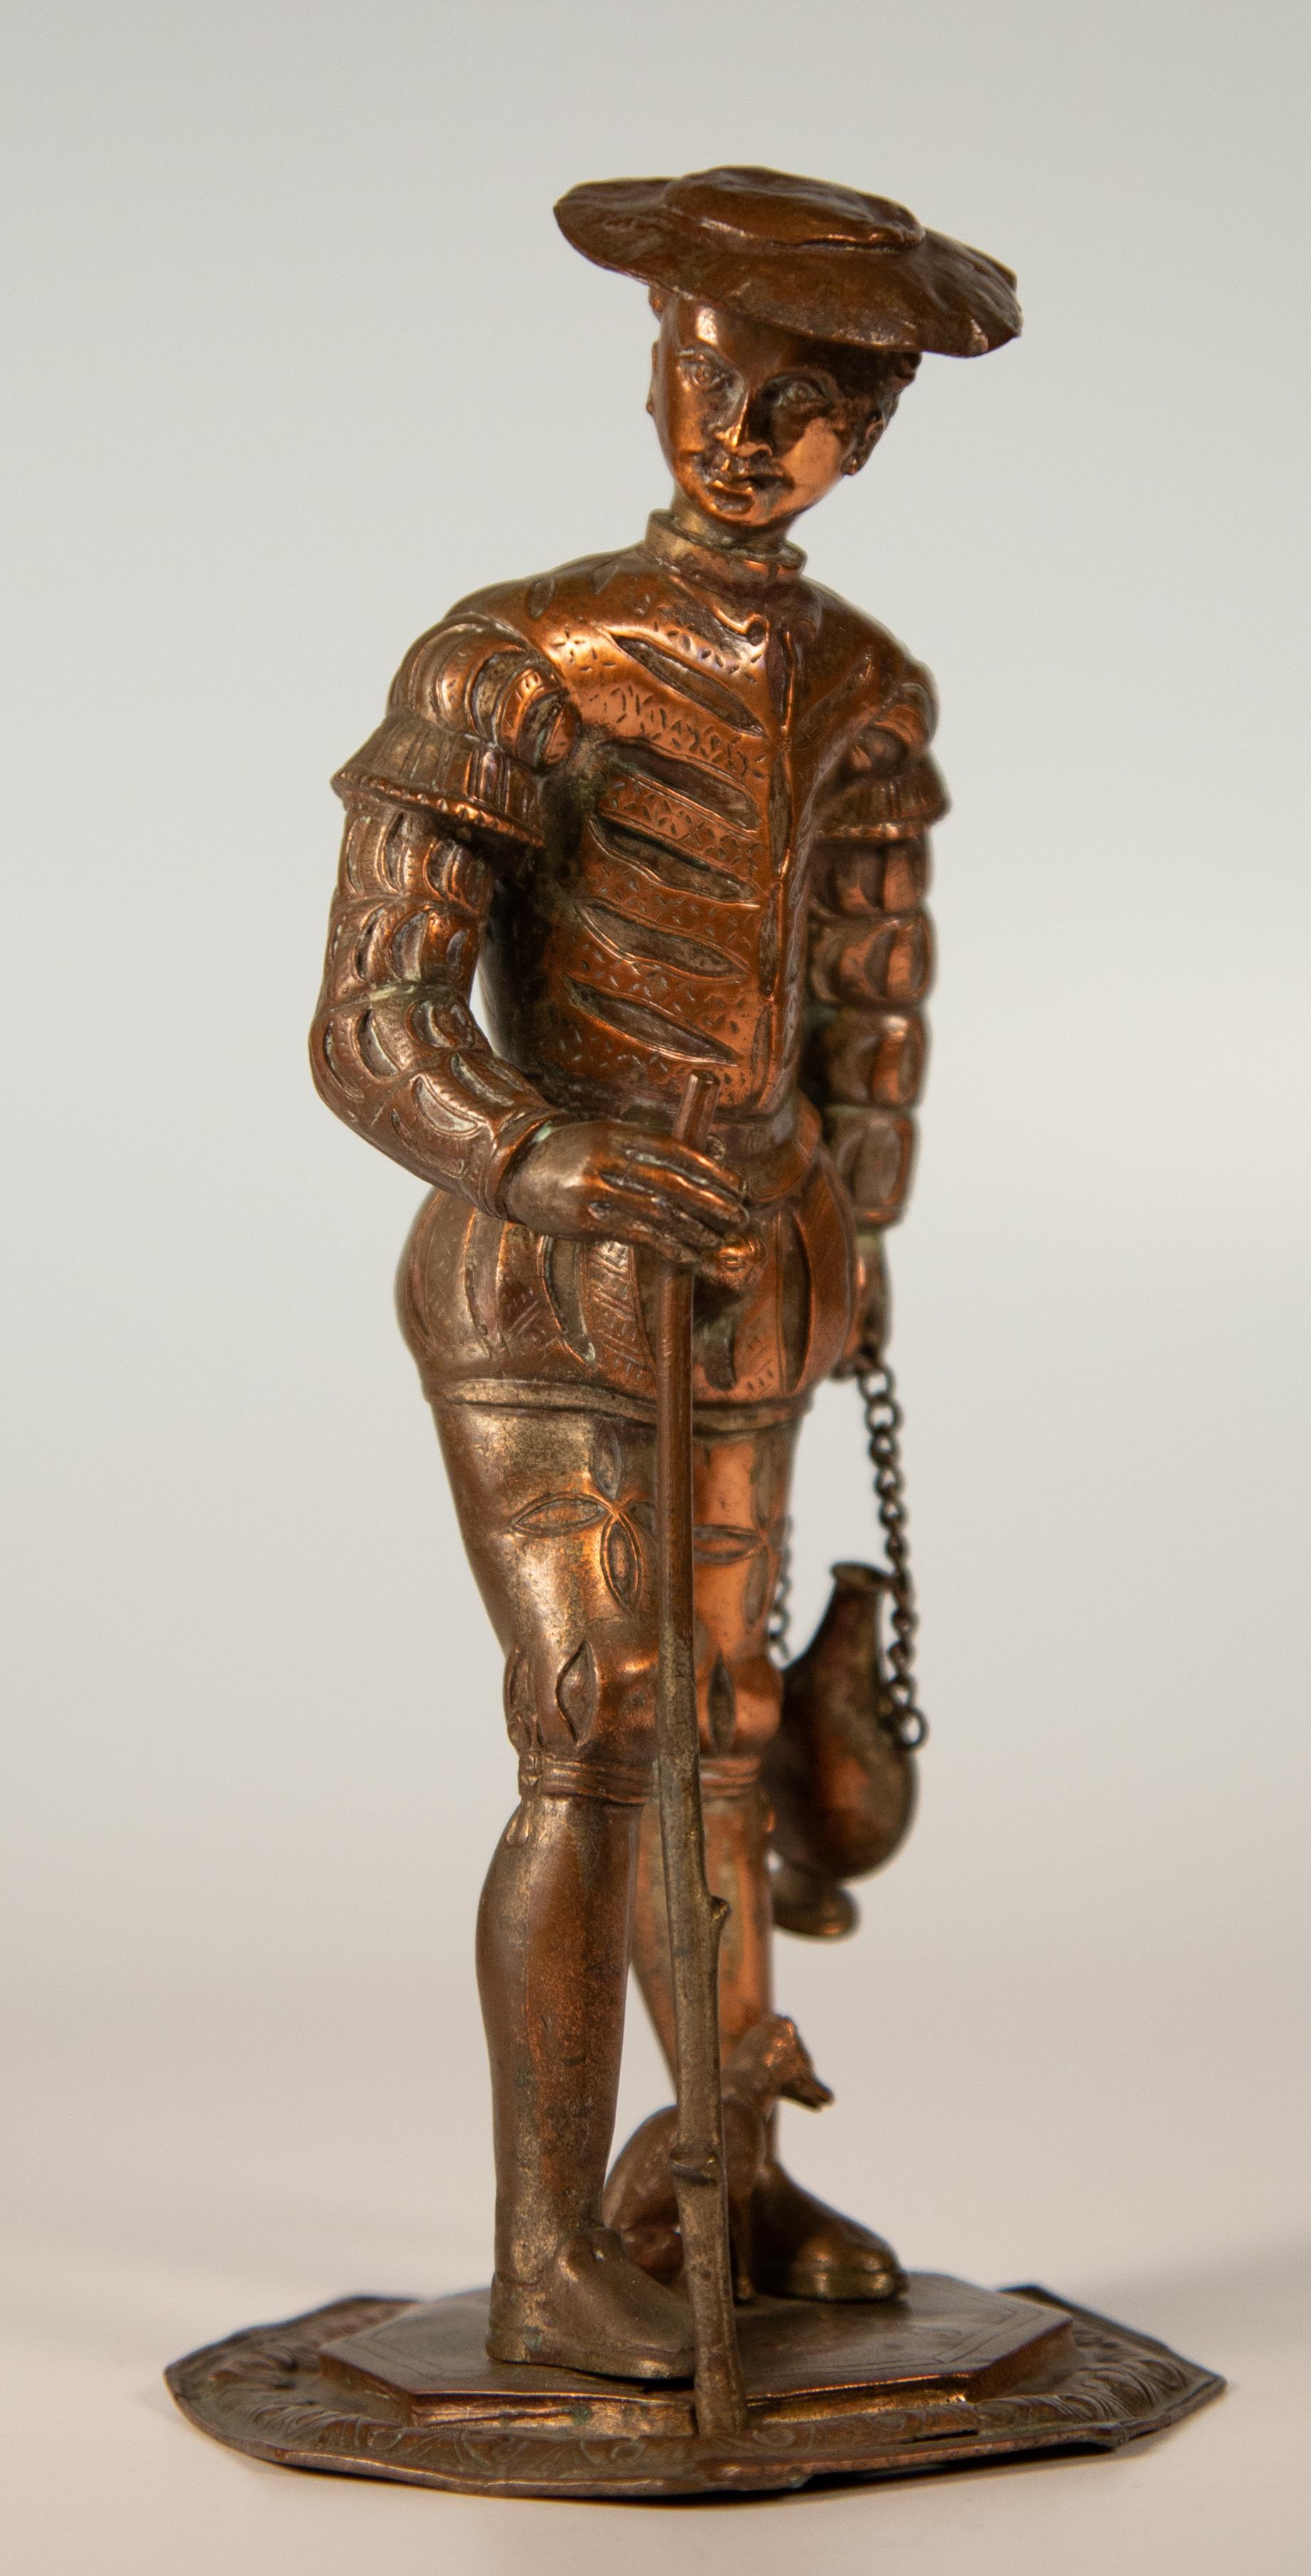 Renaissance style figure of a pilgrim with a small dog. Continental hammered, repouusse and incised copper, circa 1860.